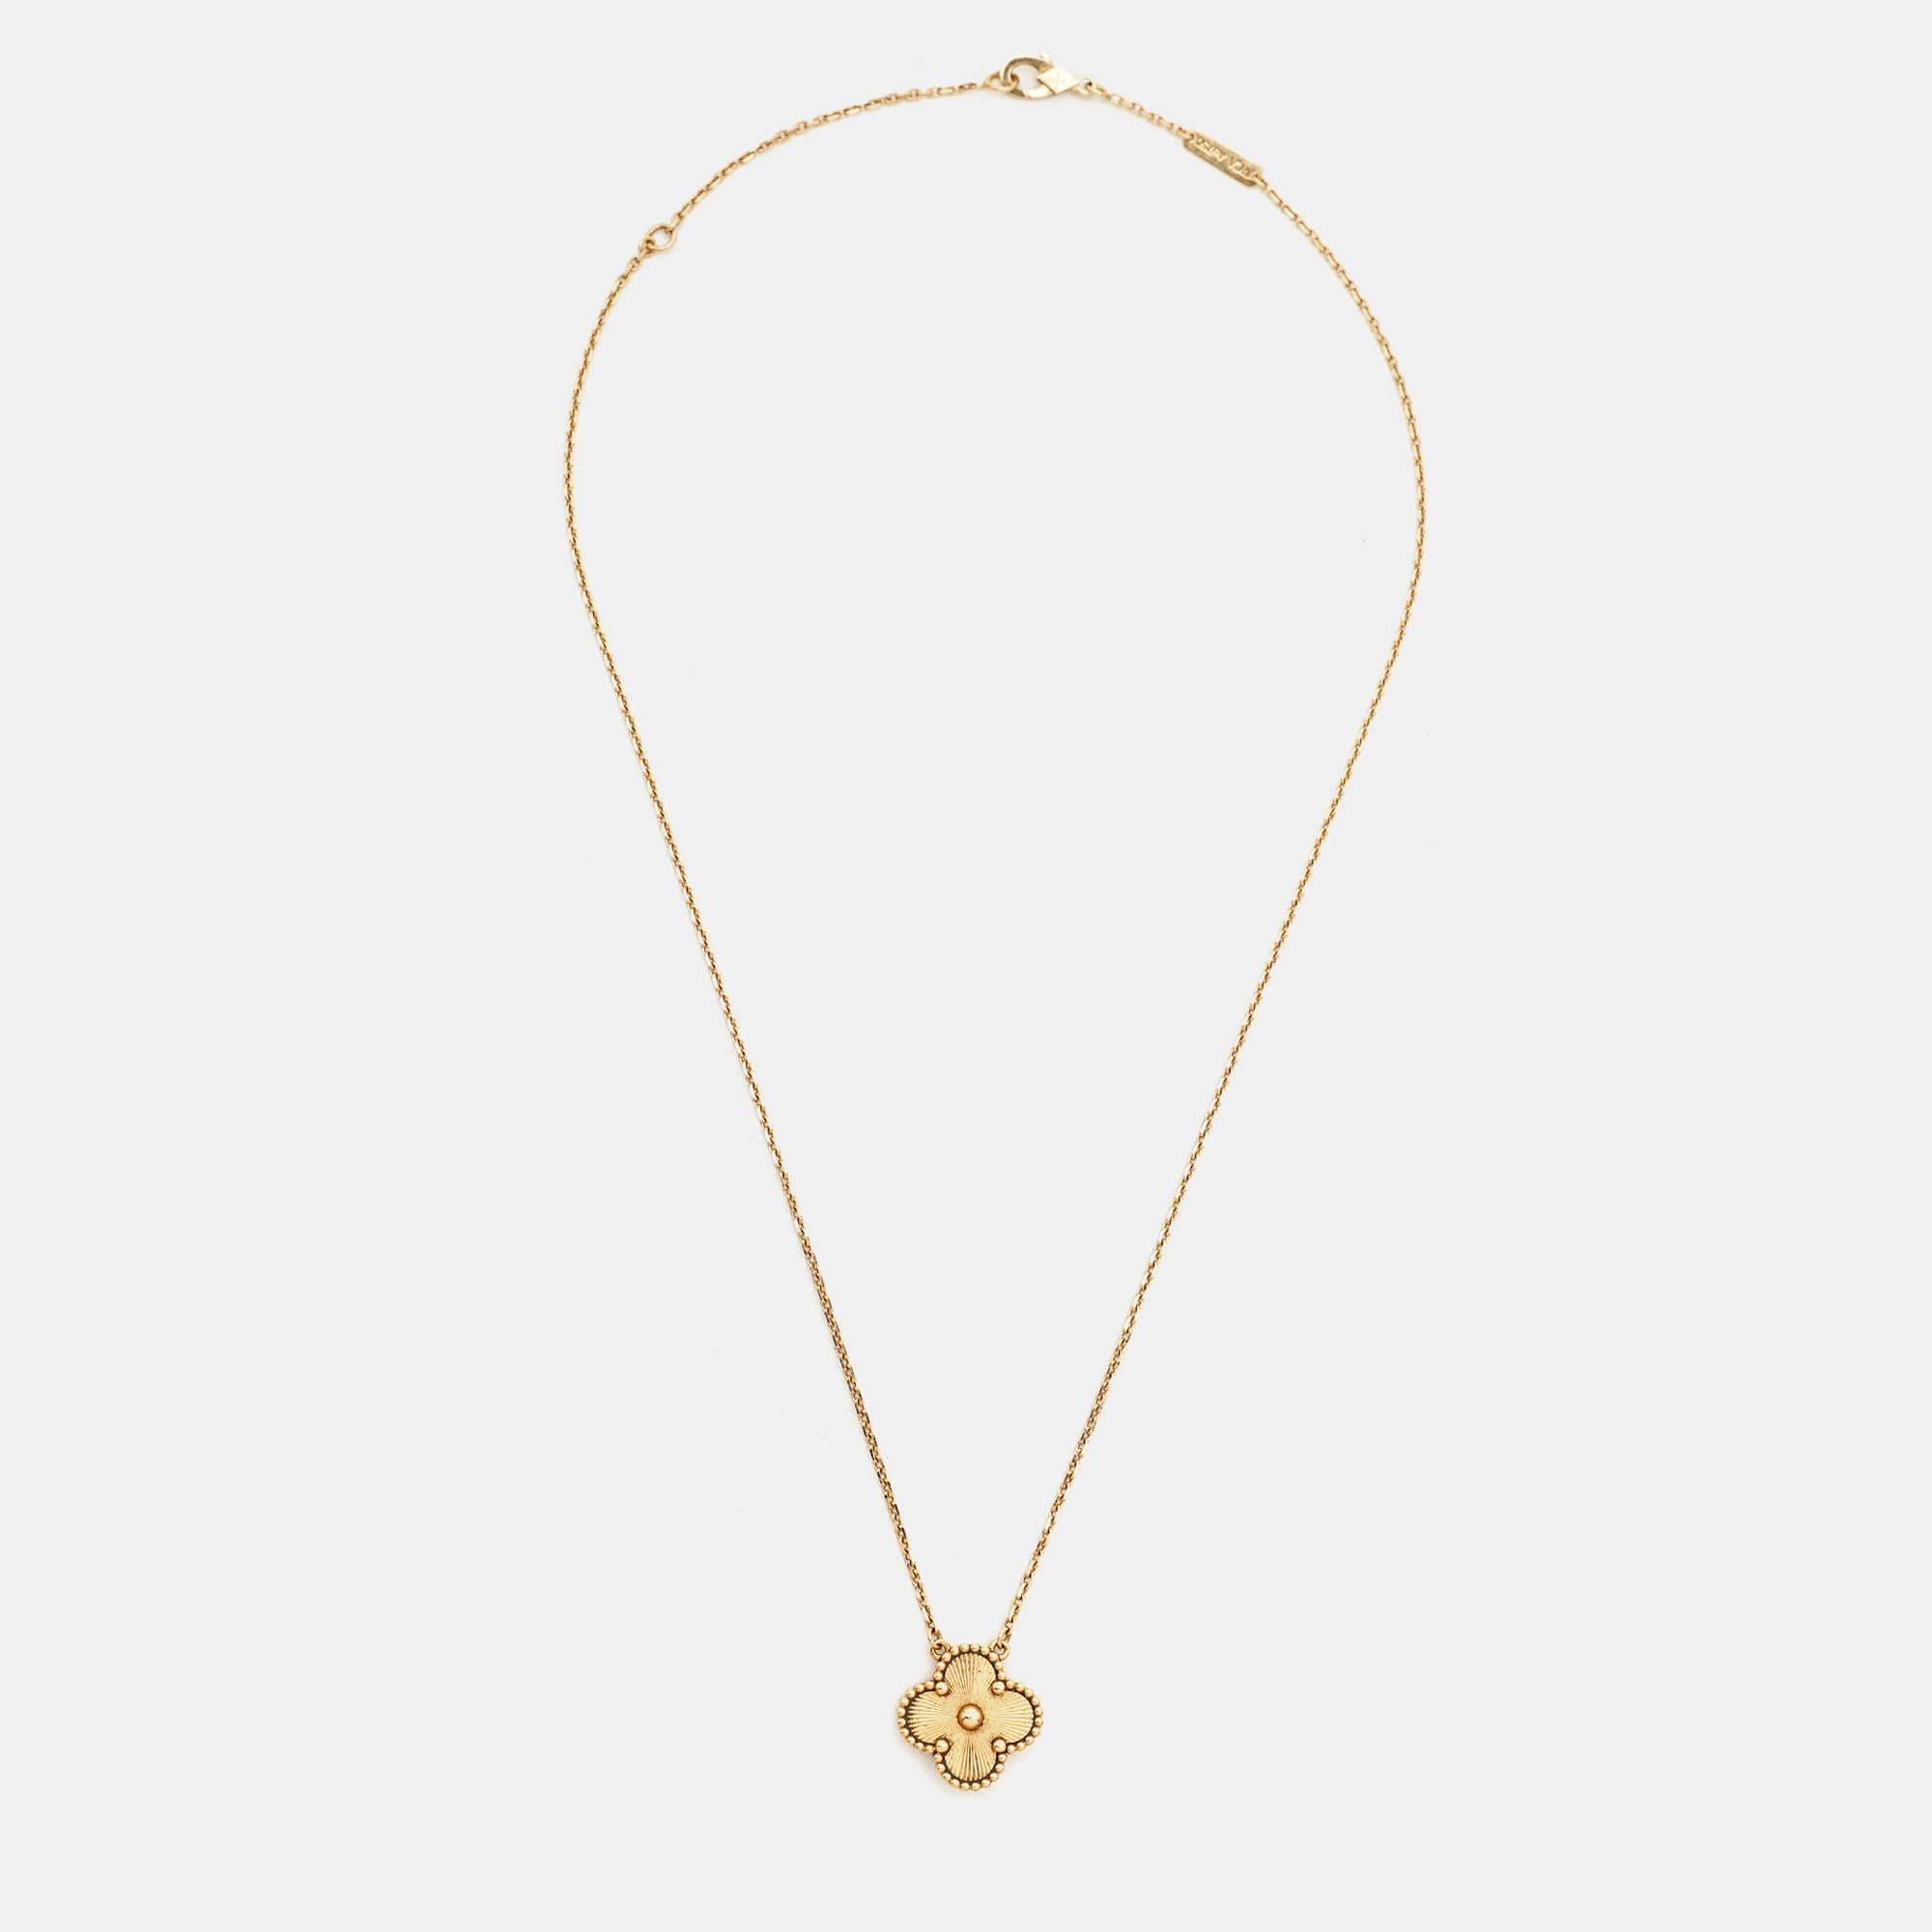 The Alhambra jewel was first created in 1968, and these Vintage Alhambra creations by Van Cleef & Arpels stay true to the original design. Crafted in 18k yellow gold, this necklace features a slender chain with a 